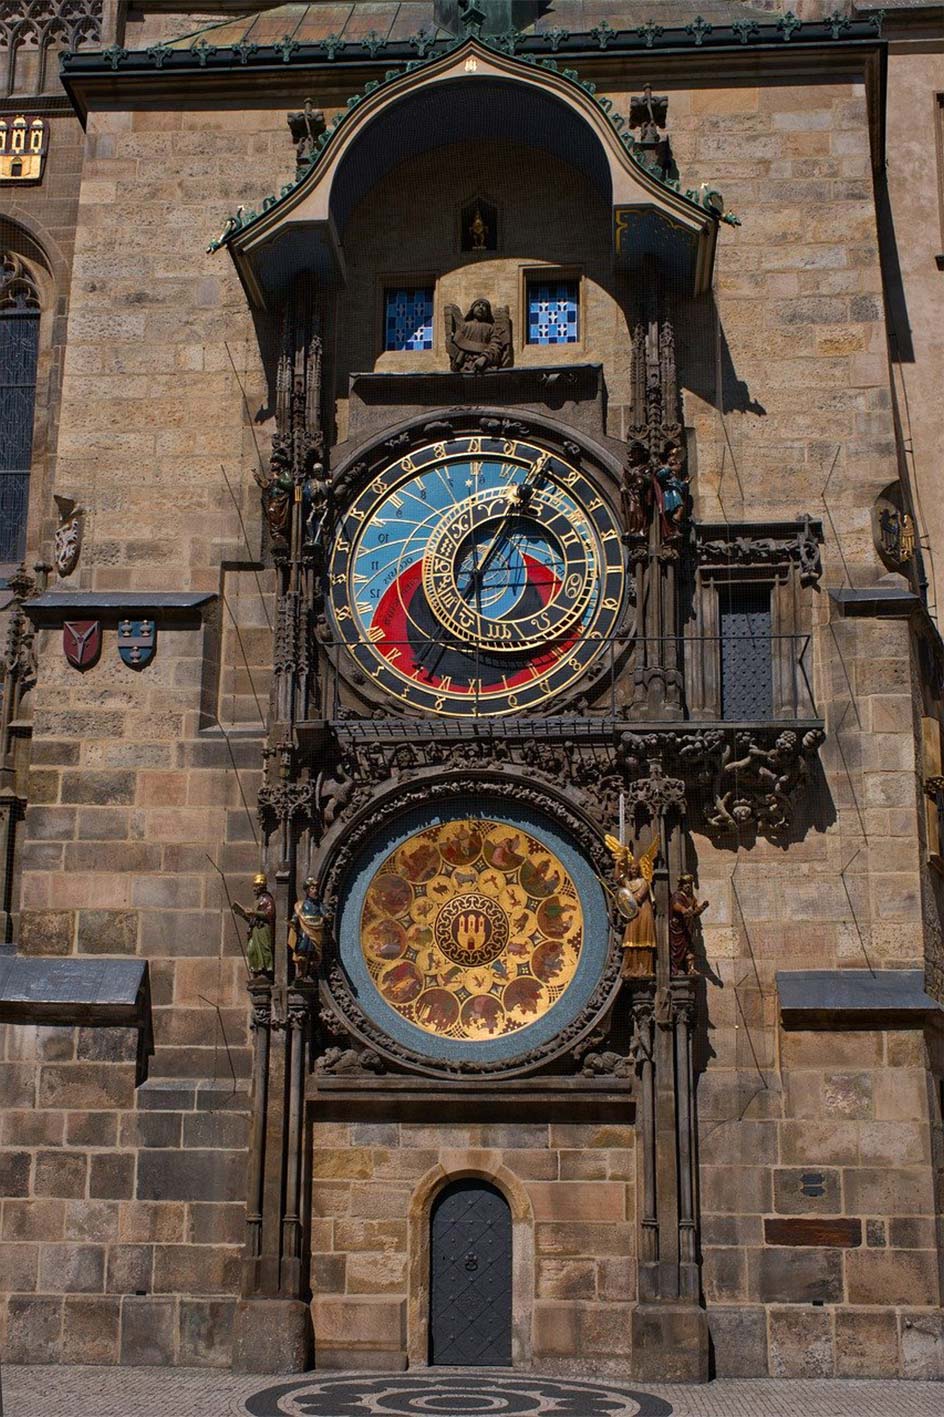 Astronomical clock situated on Old Square